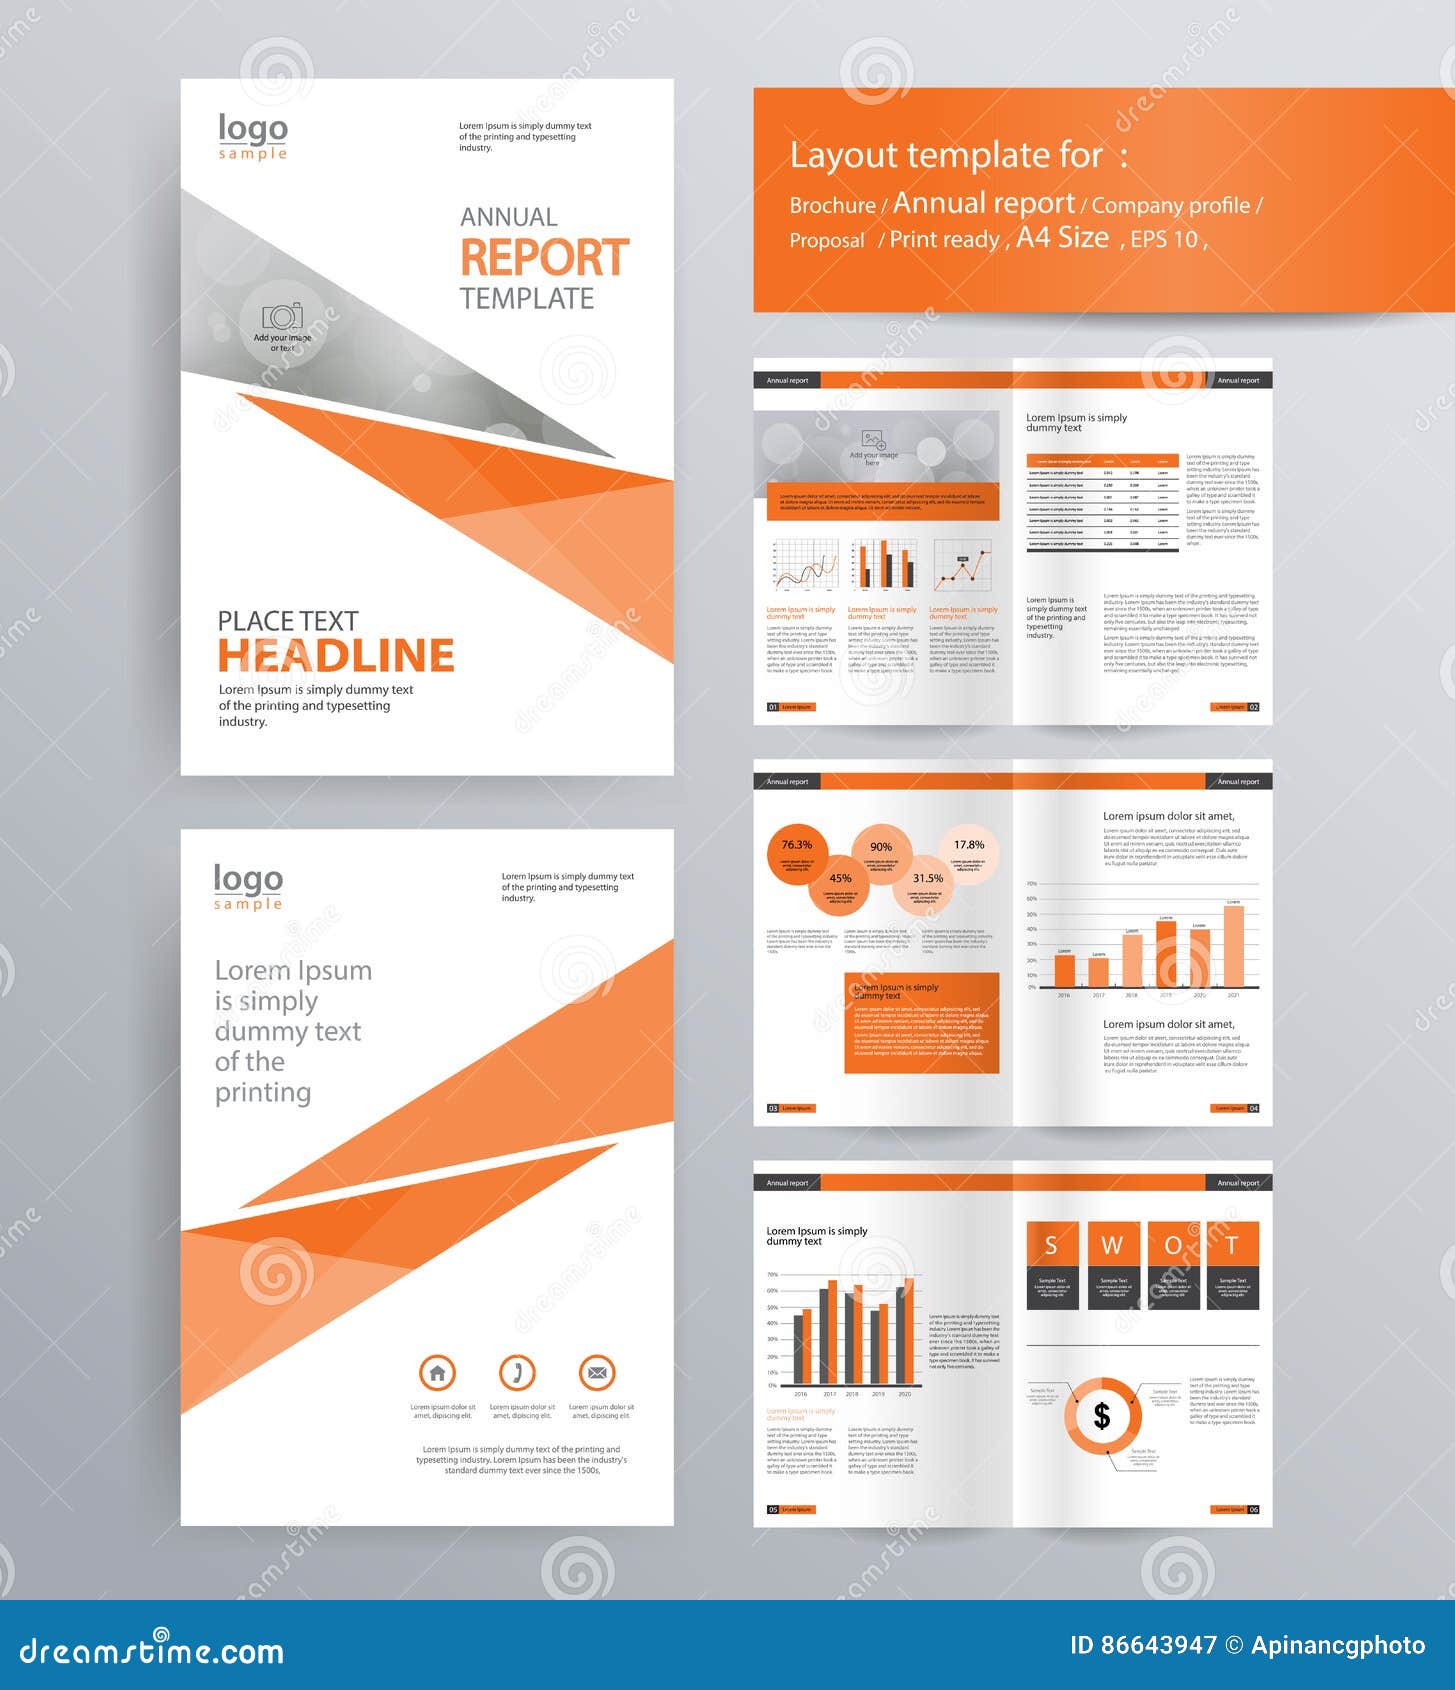 page layout for company profile, annual report, and brochure template.